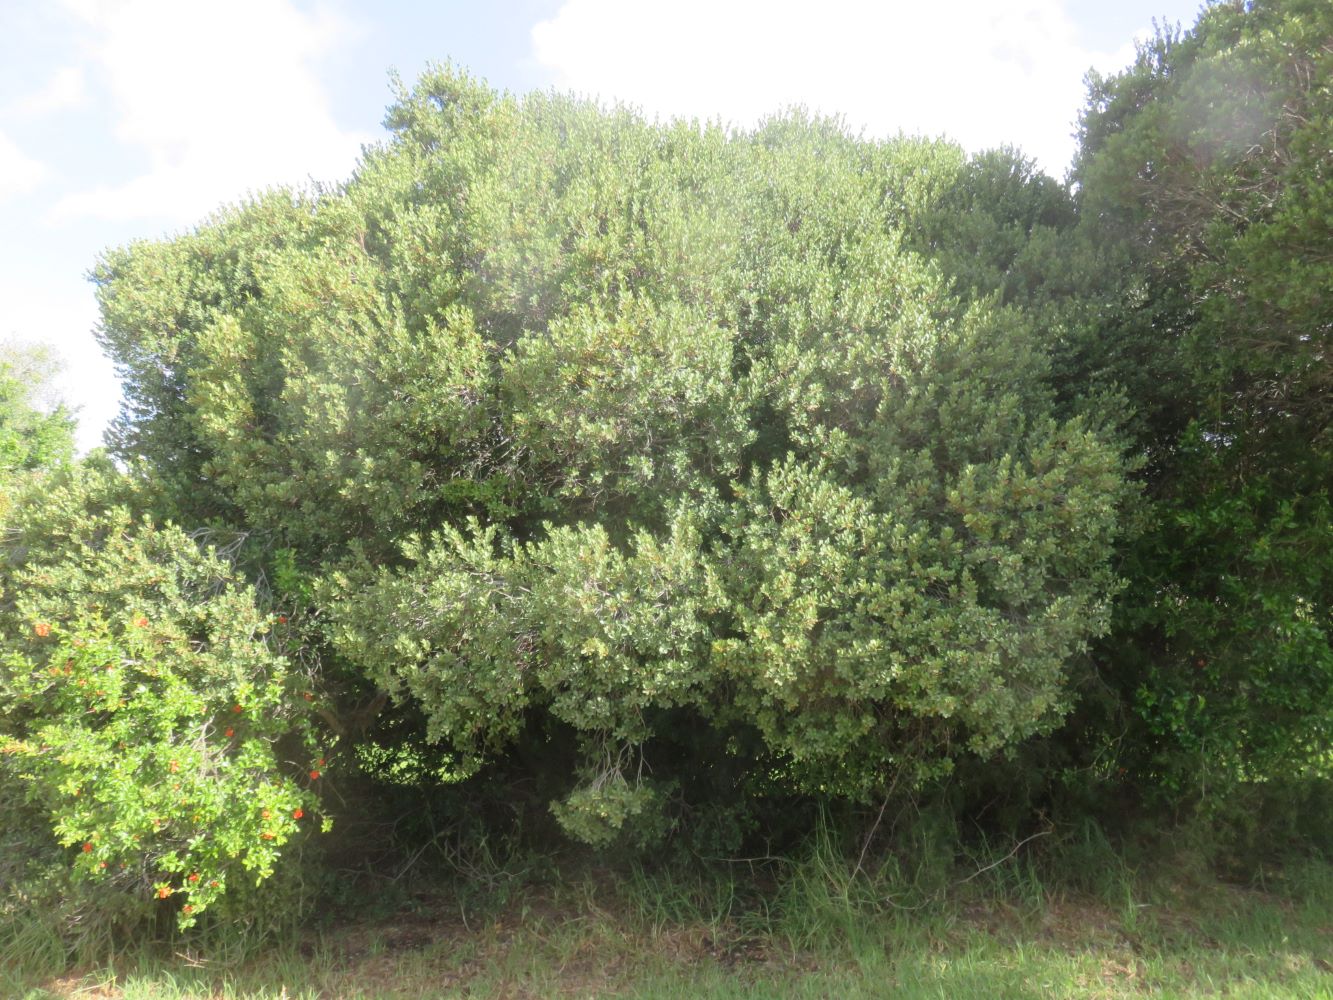 Euclea racemosa, about 3 meters high